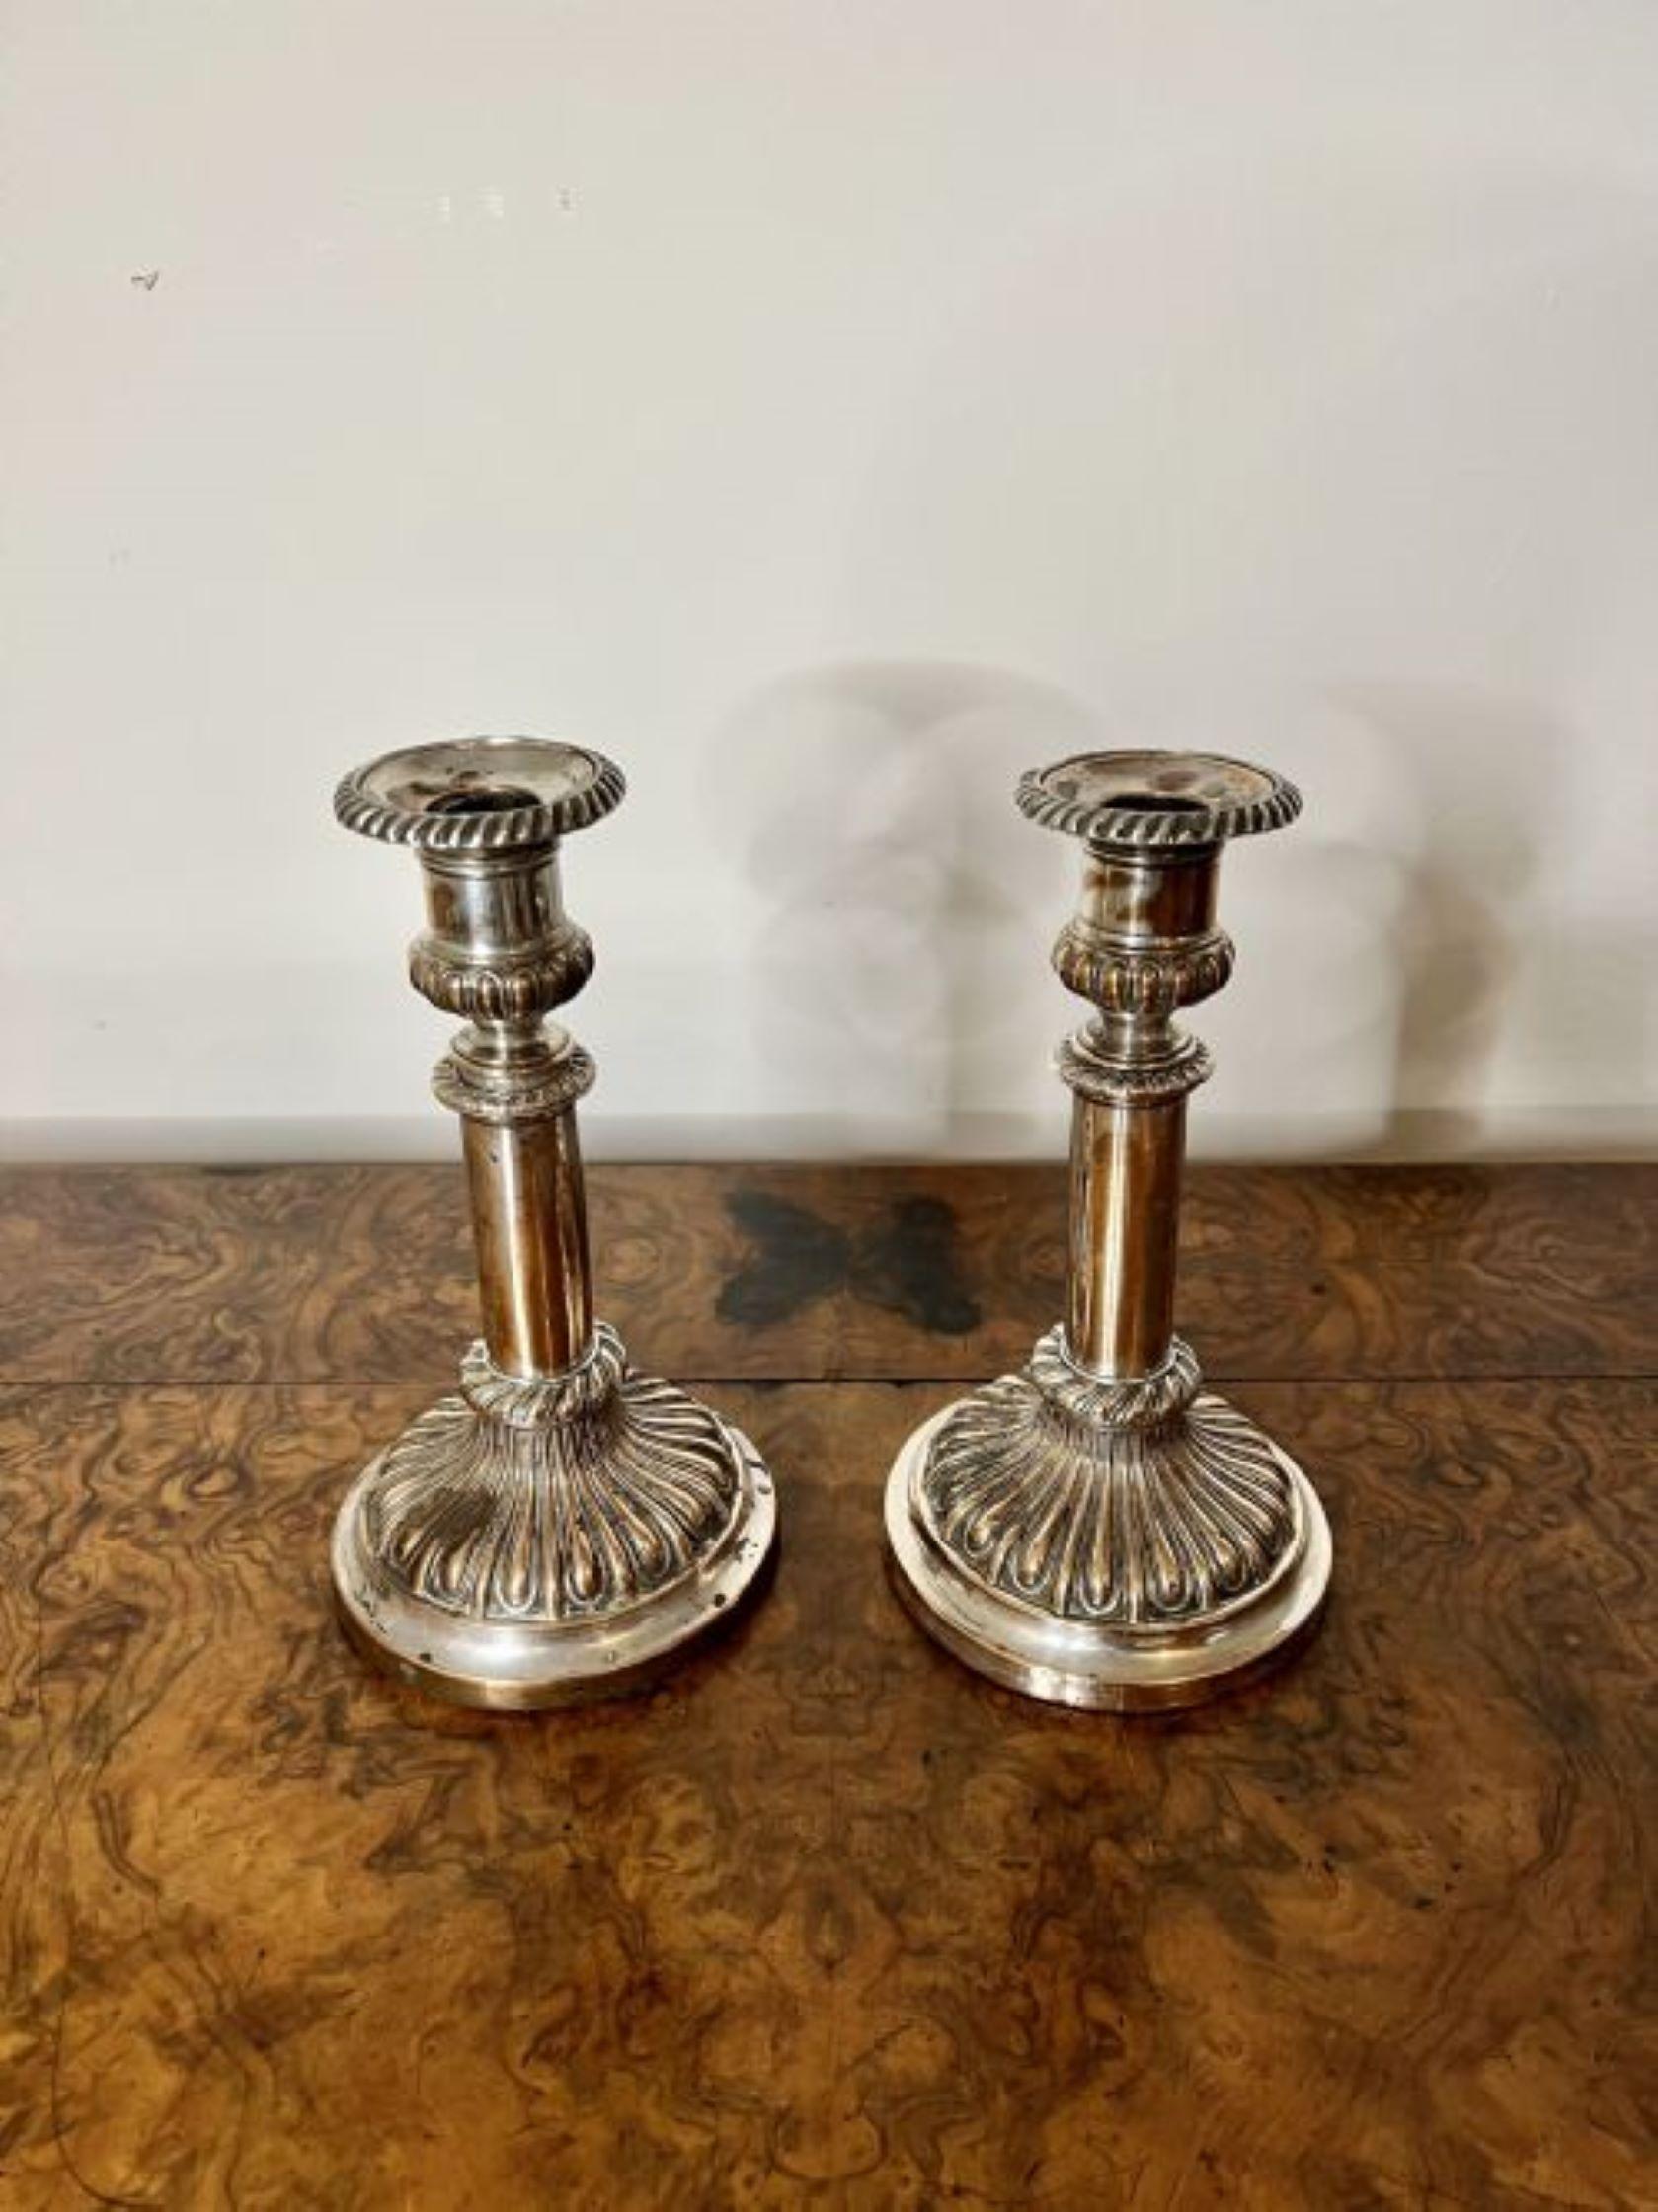 Pair of antique George III telescopic candlesticks having a lovely pair of antique George III silver plated on copper telescopic candlesticks standing circular stepped bases.